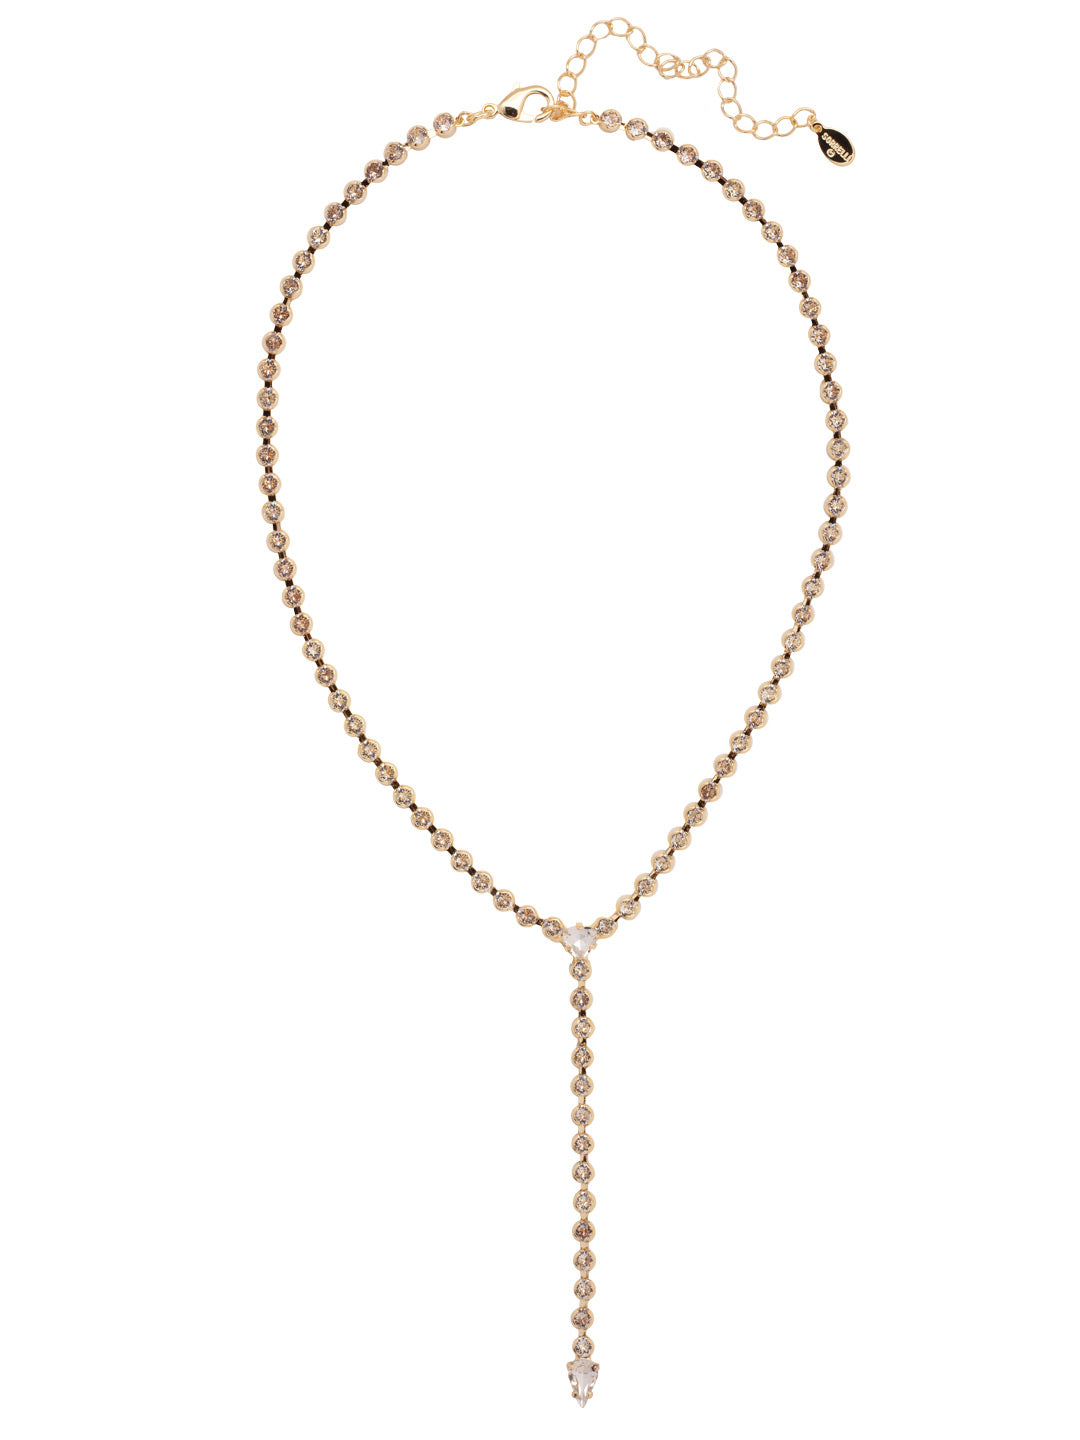 Lena Lariat Long Necklace - 4NFC14BGCRY - <p>The Lena Lariat Long Necklace is a gorgeous statement piece. A lariat style adjustable chain is studded with crystals, and secured with a lobster claw clasp. From Sorrelli's Crystal collection in our Bright Gold-tone finish.</p>